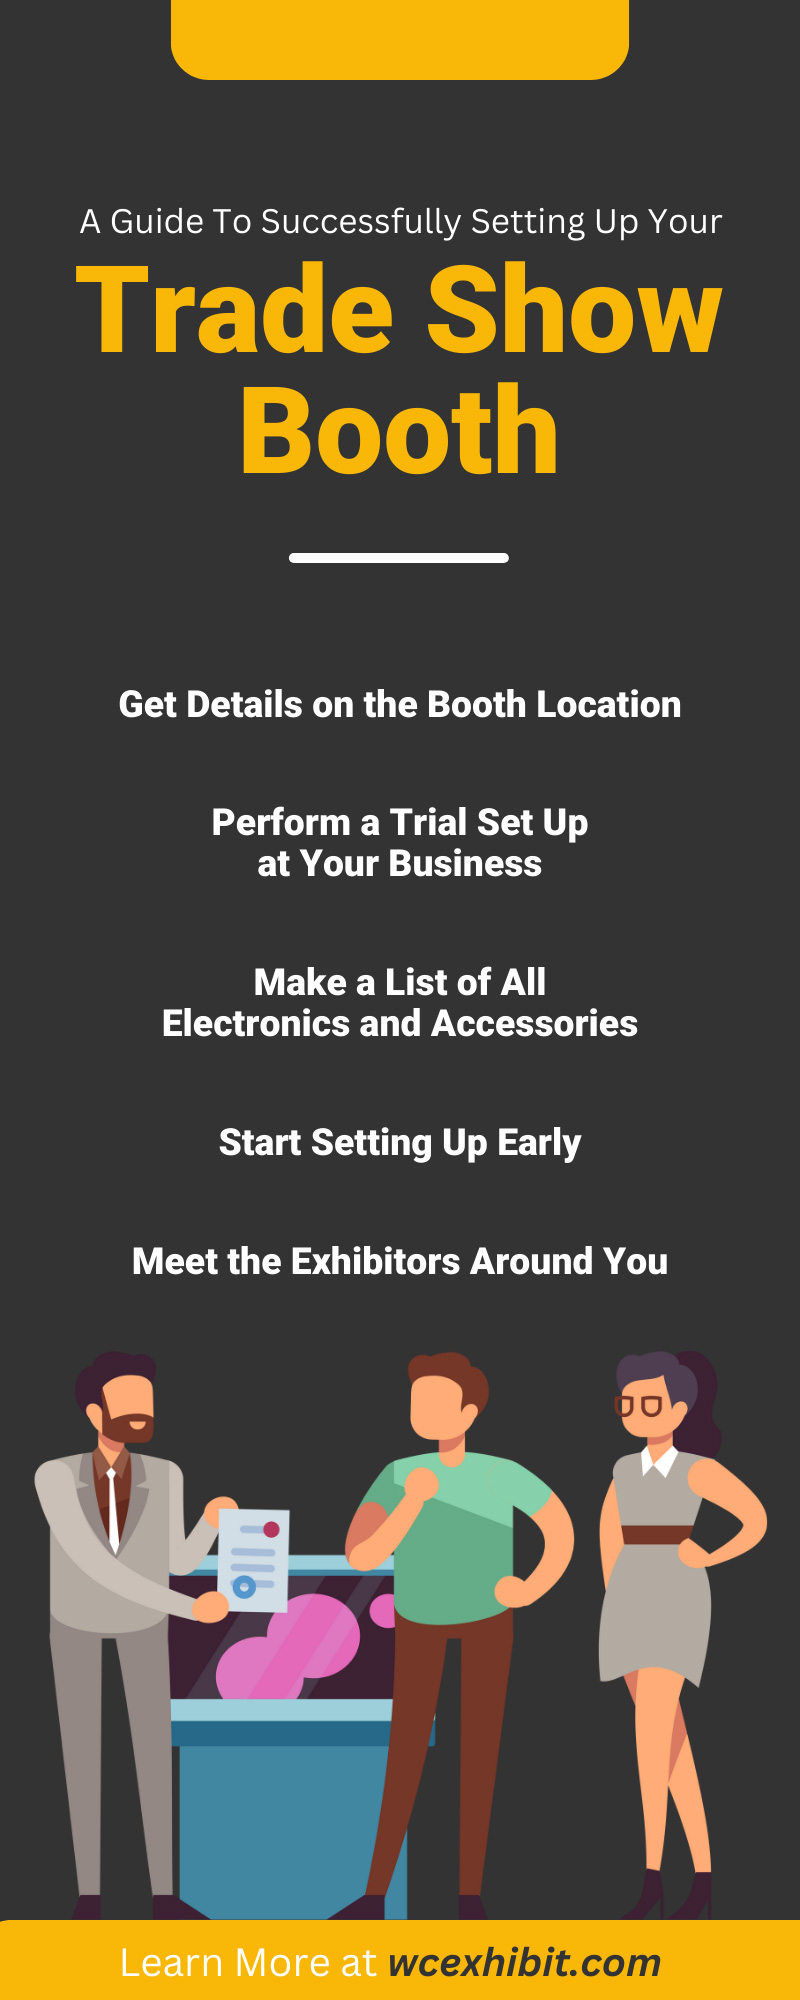 A Guide To Successfully Setting Up Your Trade Show Booth